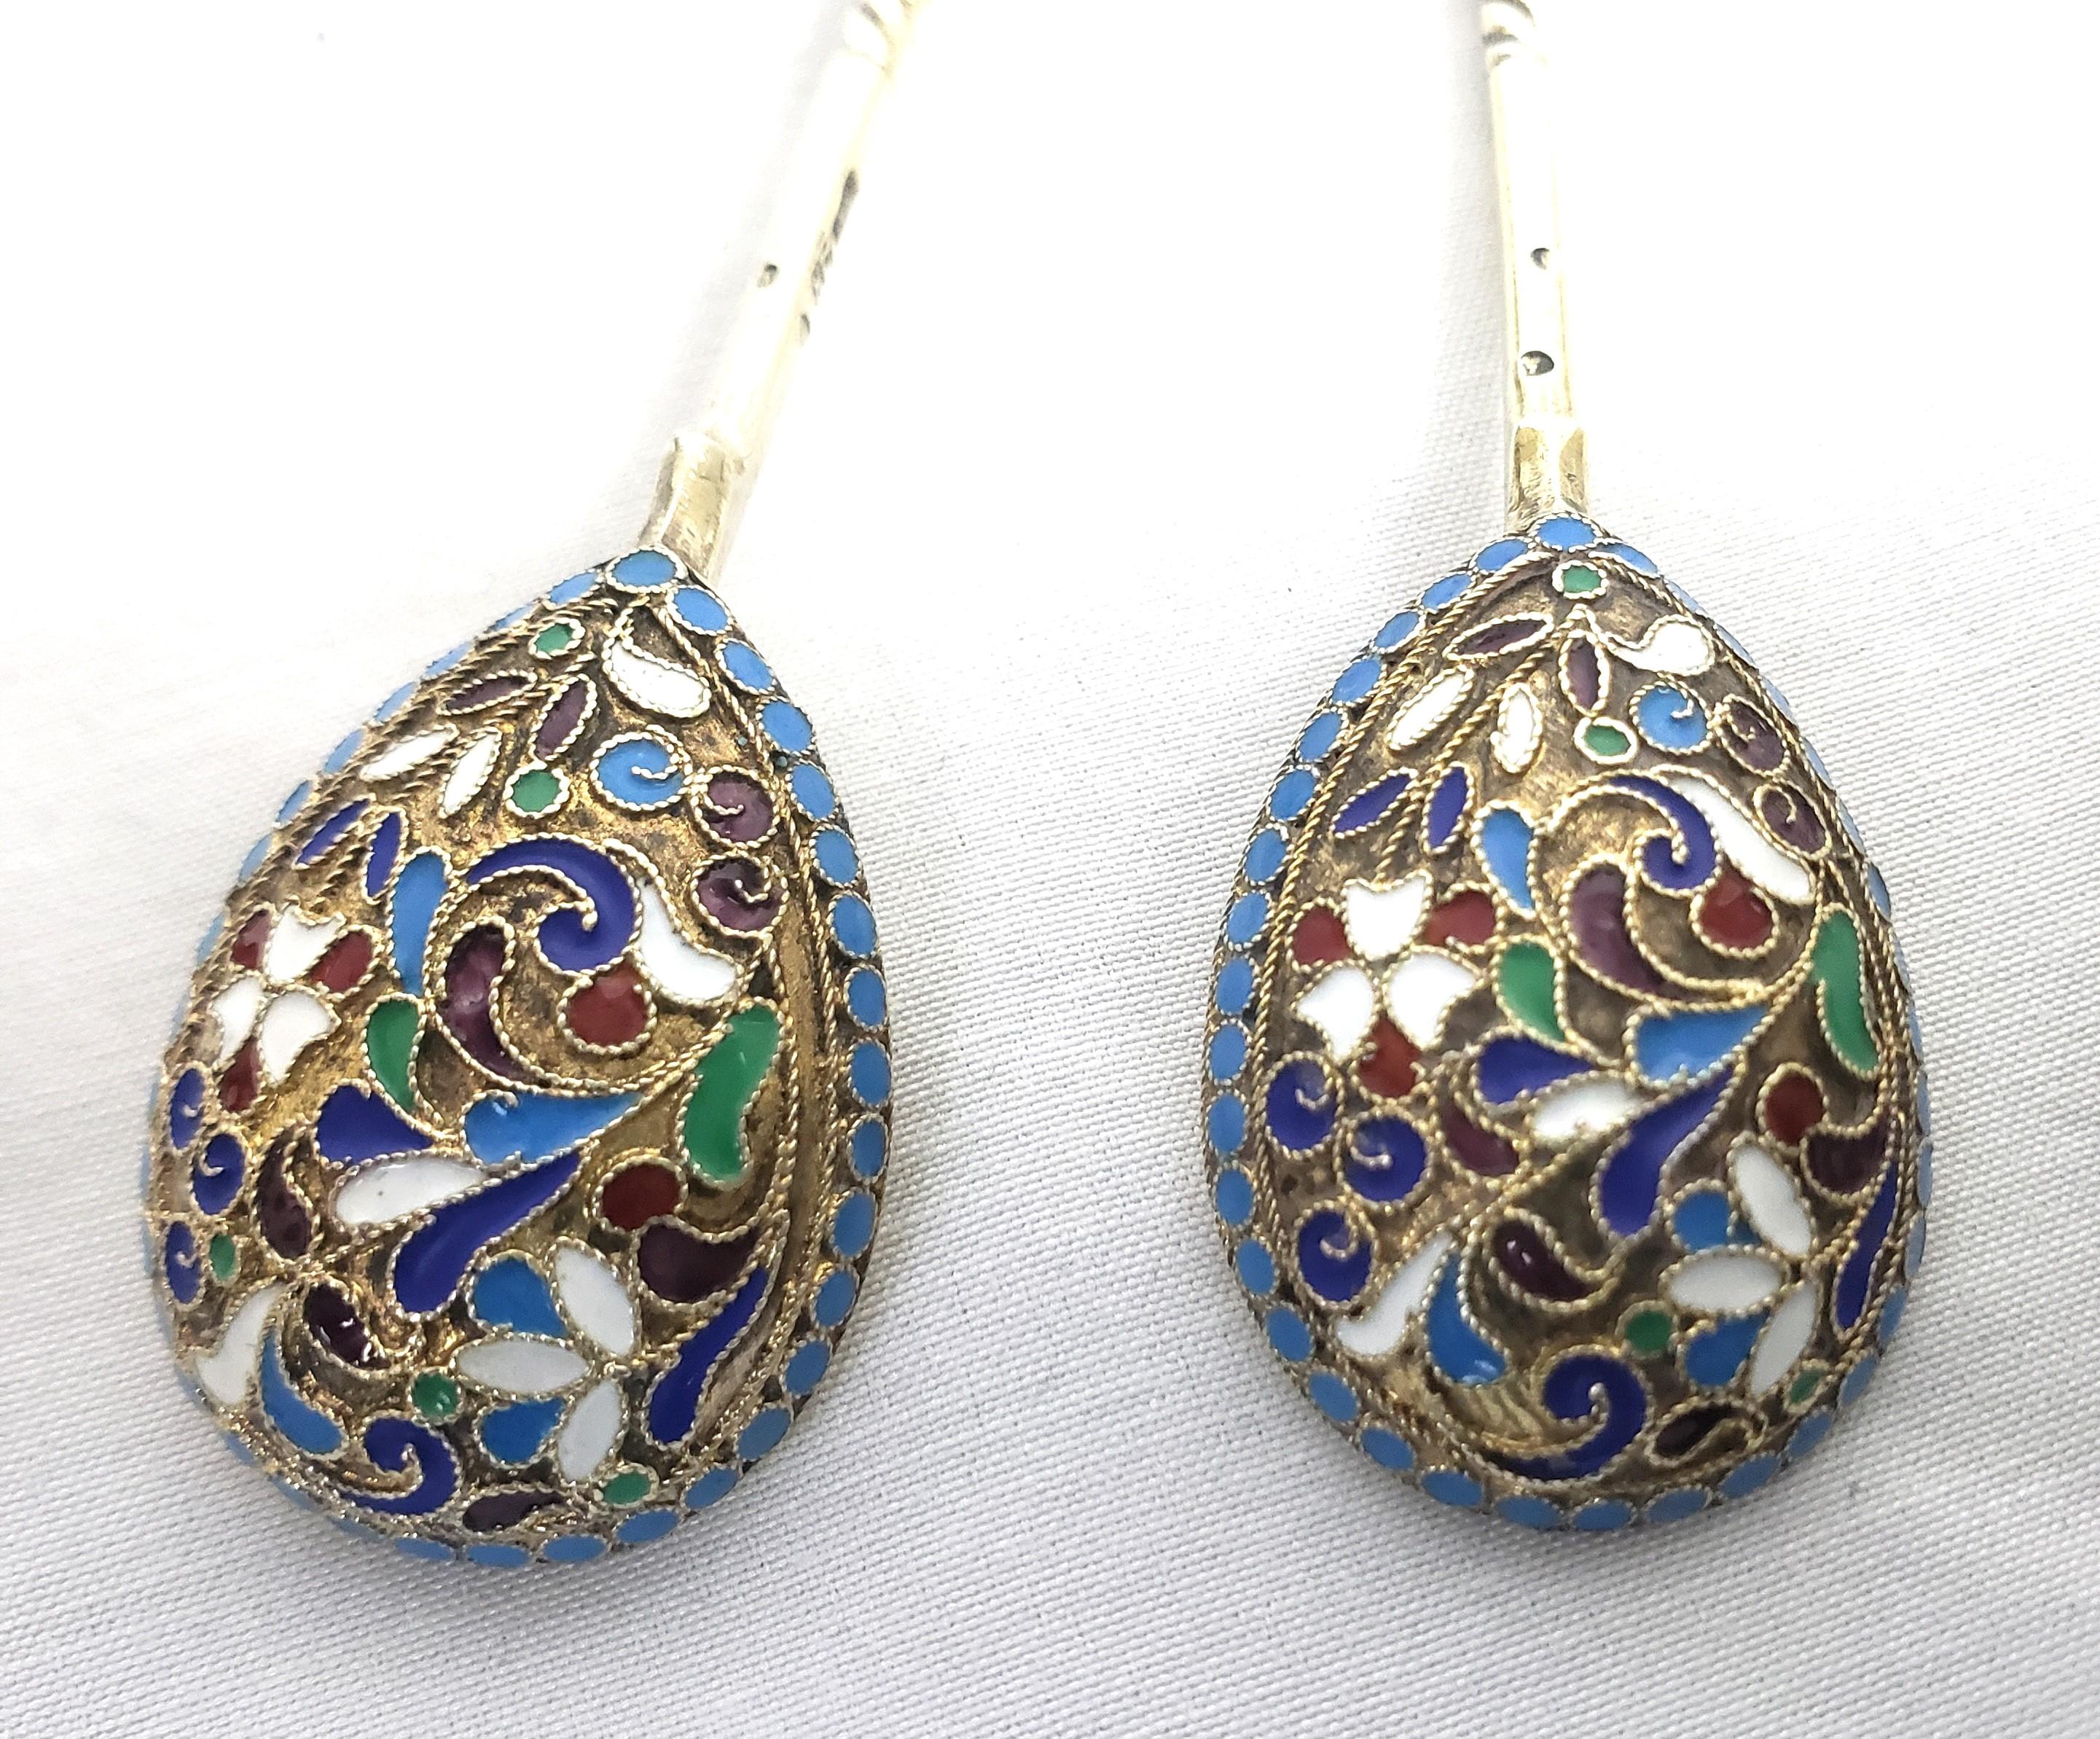 Antique Russian Silver & Enamel Spoon Set with Ornate Floral Motif For Sale 2